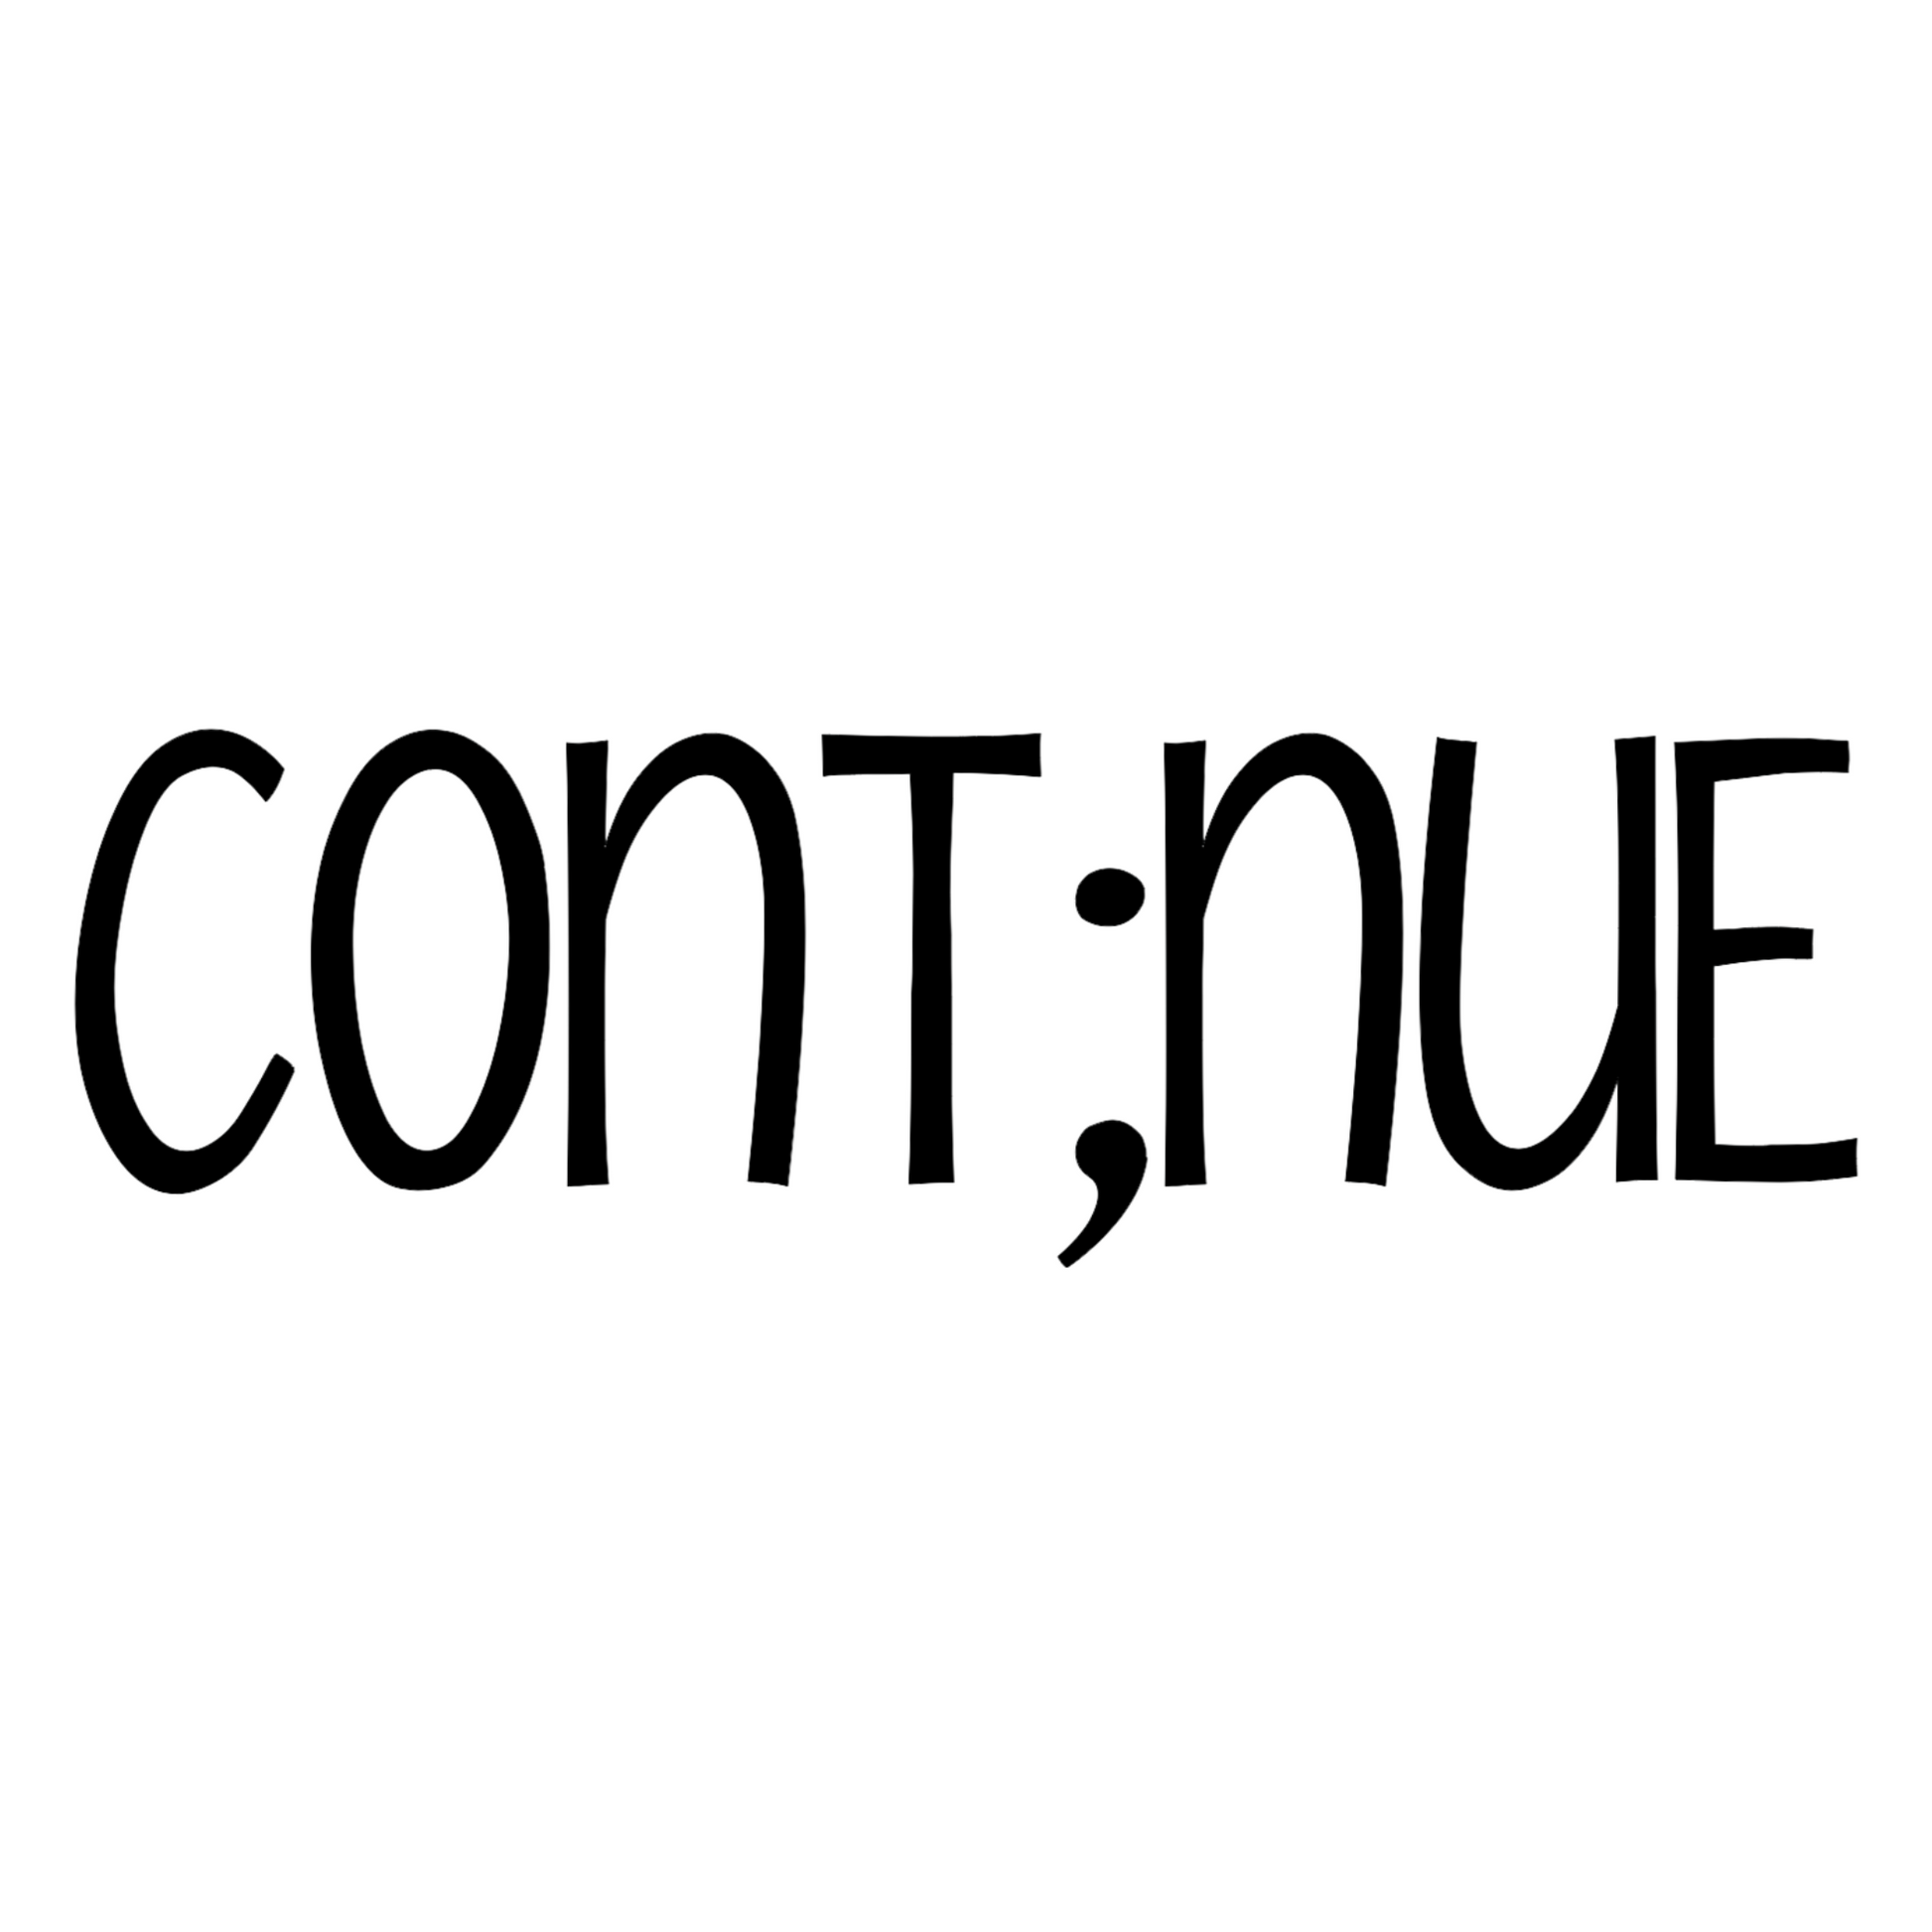 Cont;nue - meaning "my story isn't over". You're the author of your story. Don't end it with a period when you feel stuck. Pause, take it in and continue on. Shirt is in a light gray with black writing. This is the continue design in black writing on white background.